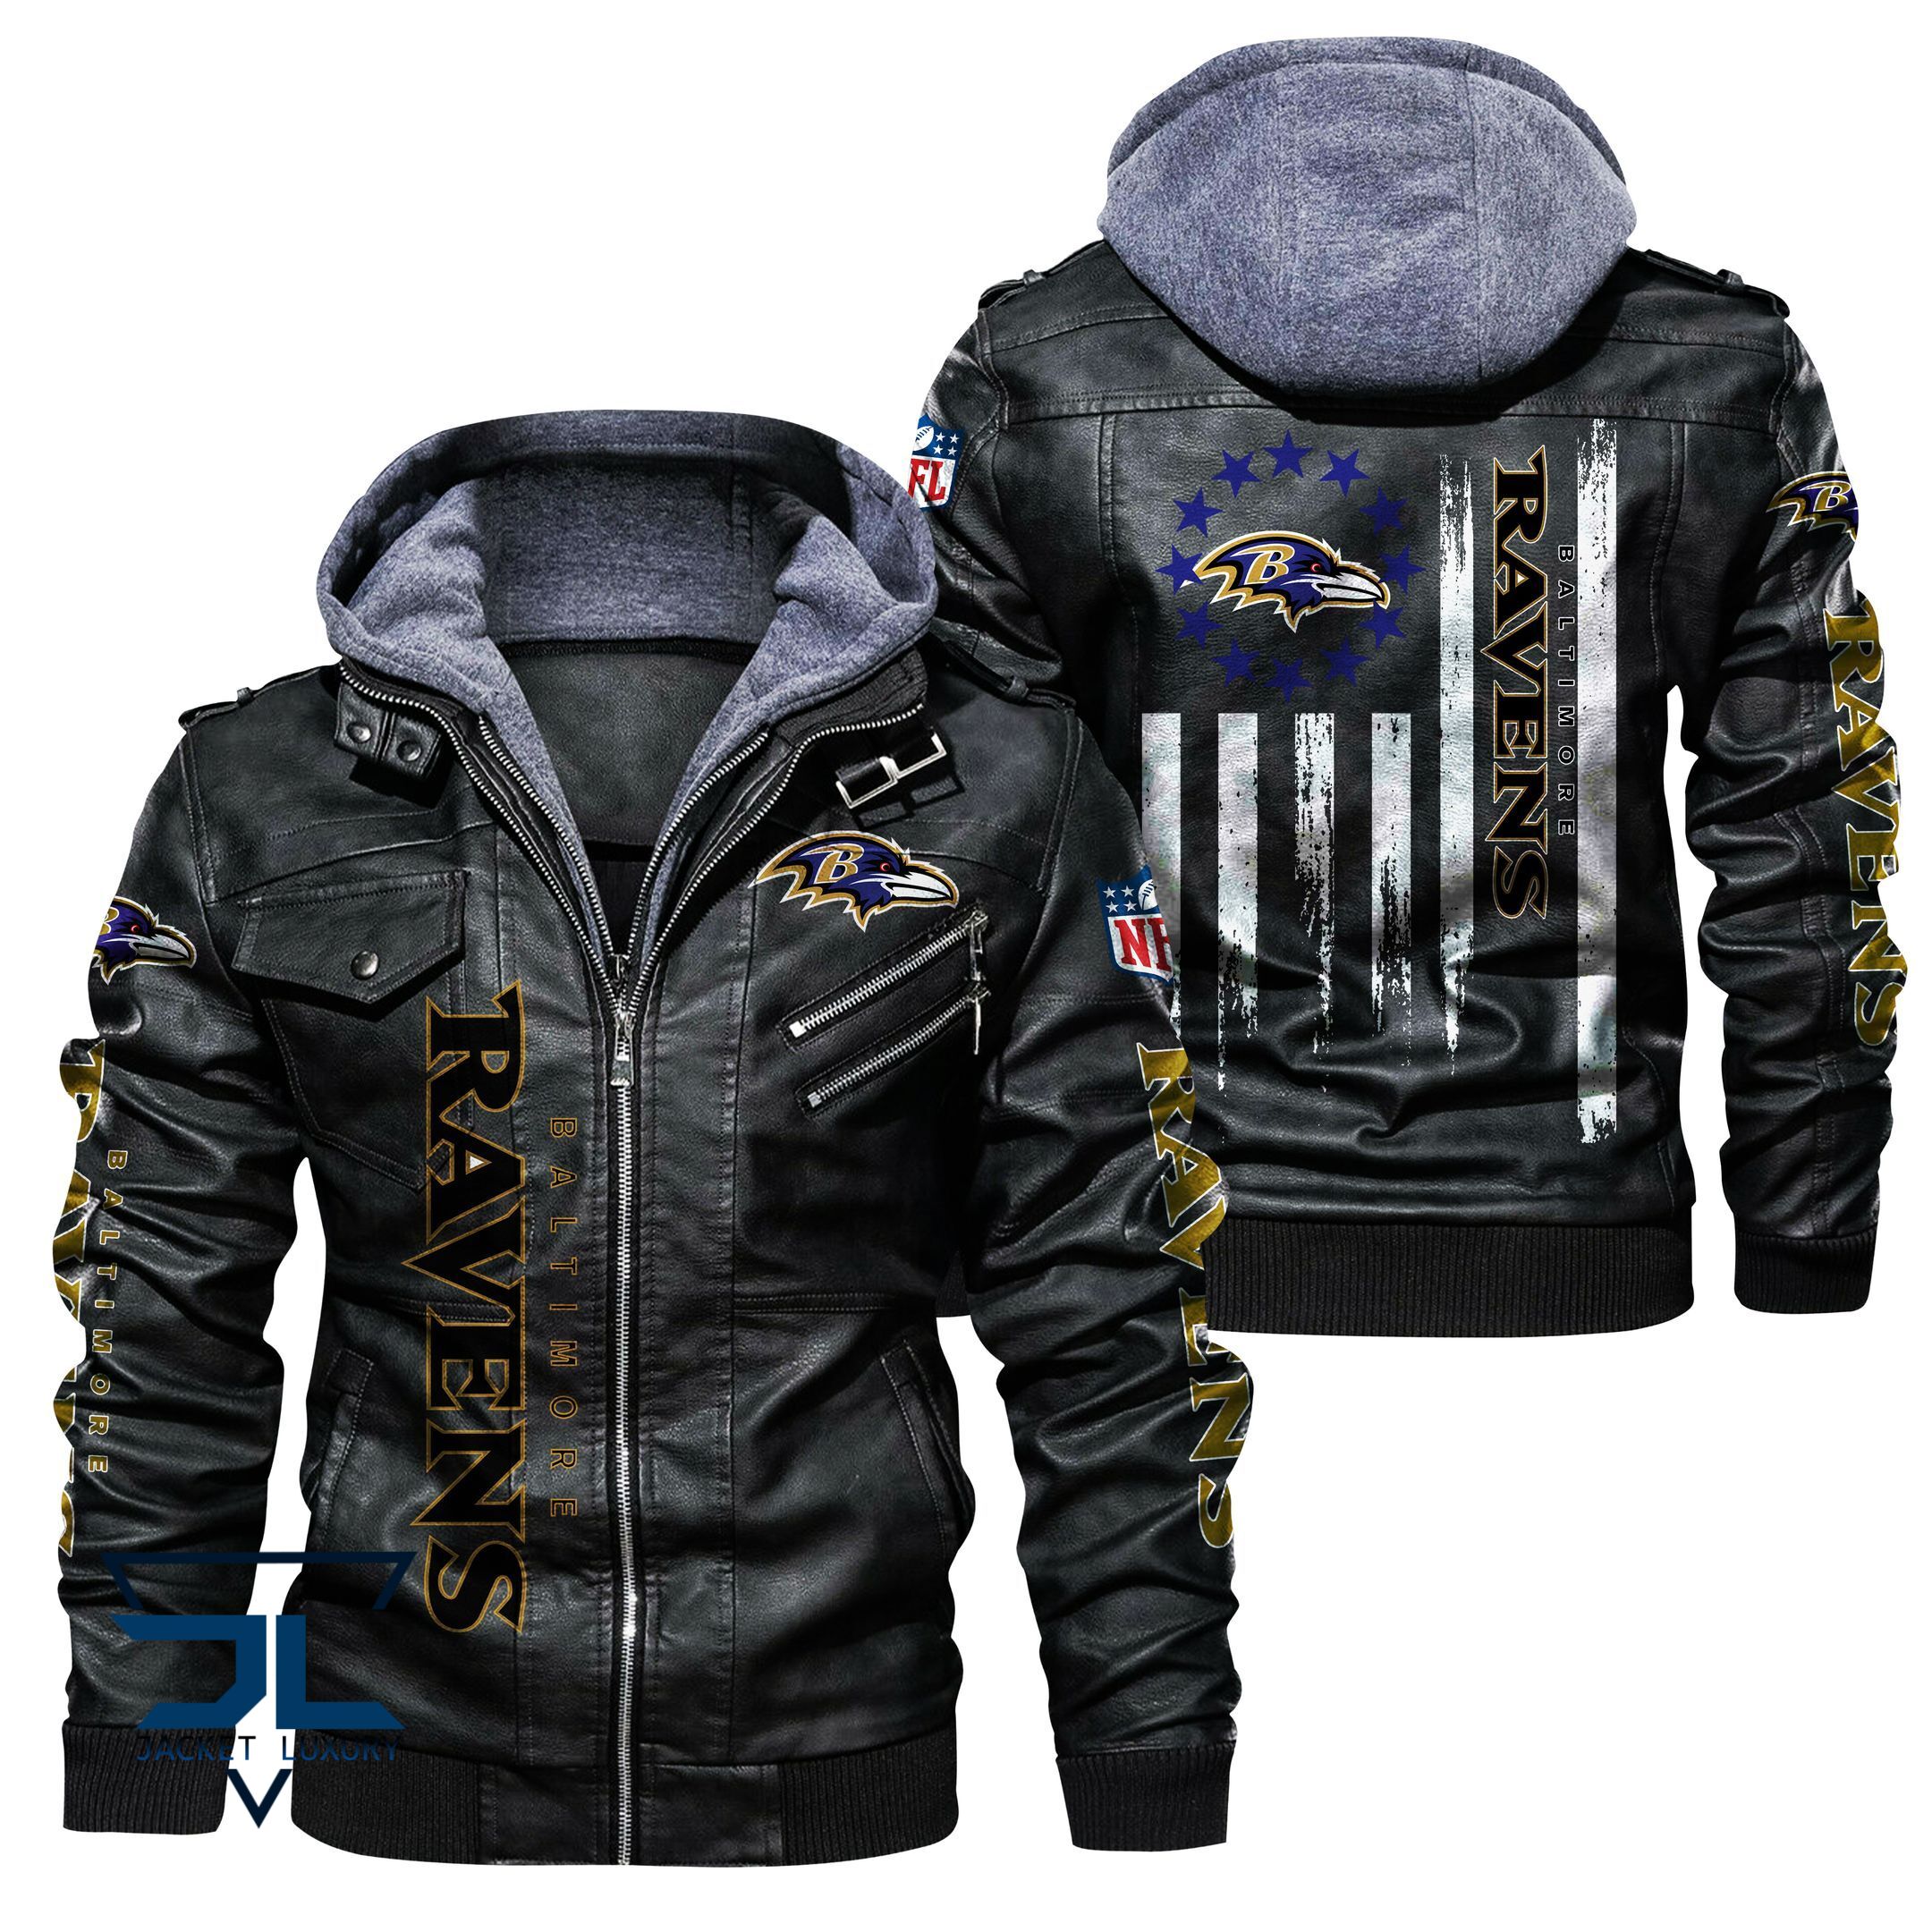 100+ best selling leather jacket on Tezostore 2022 43